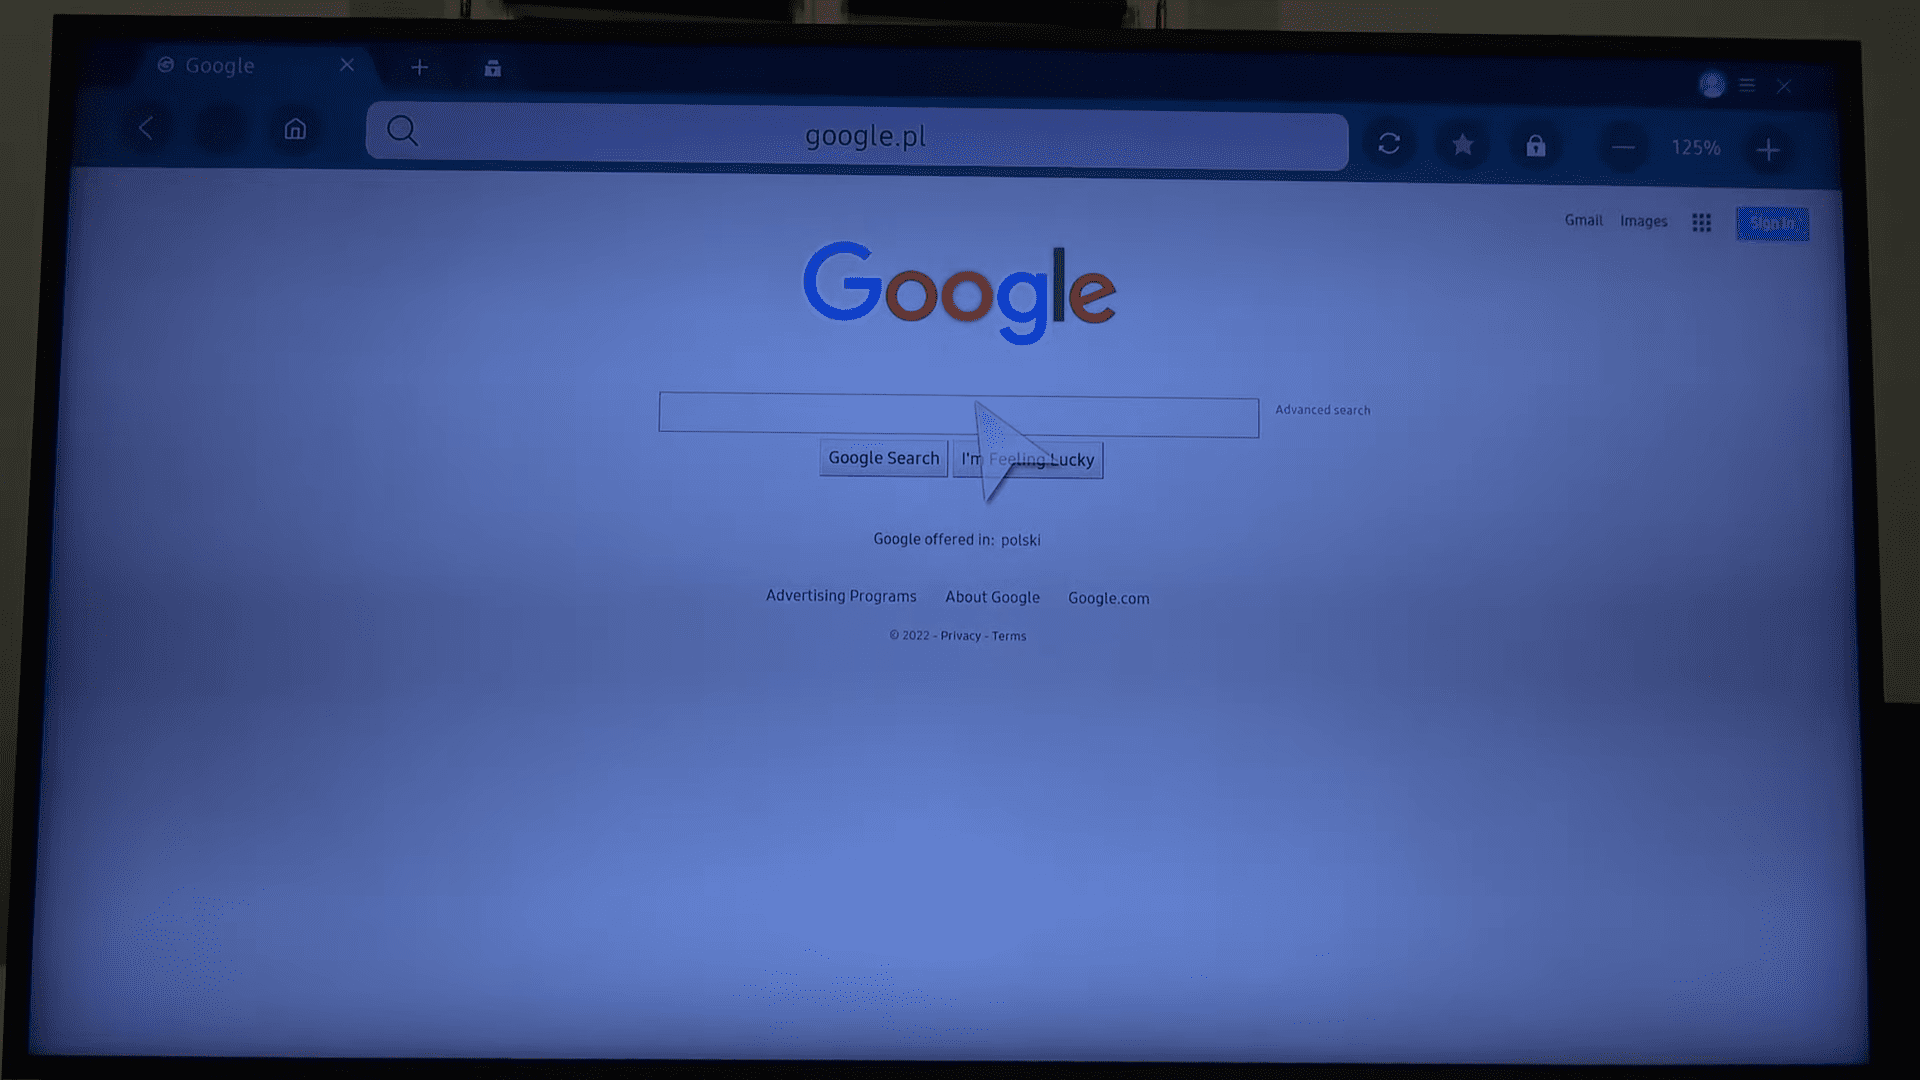 Accessing Web Pages